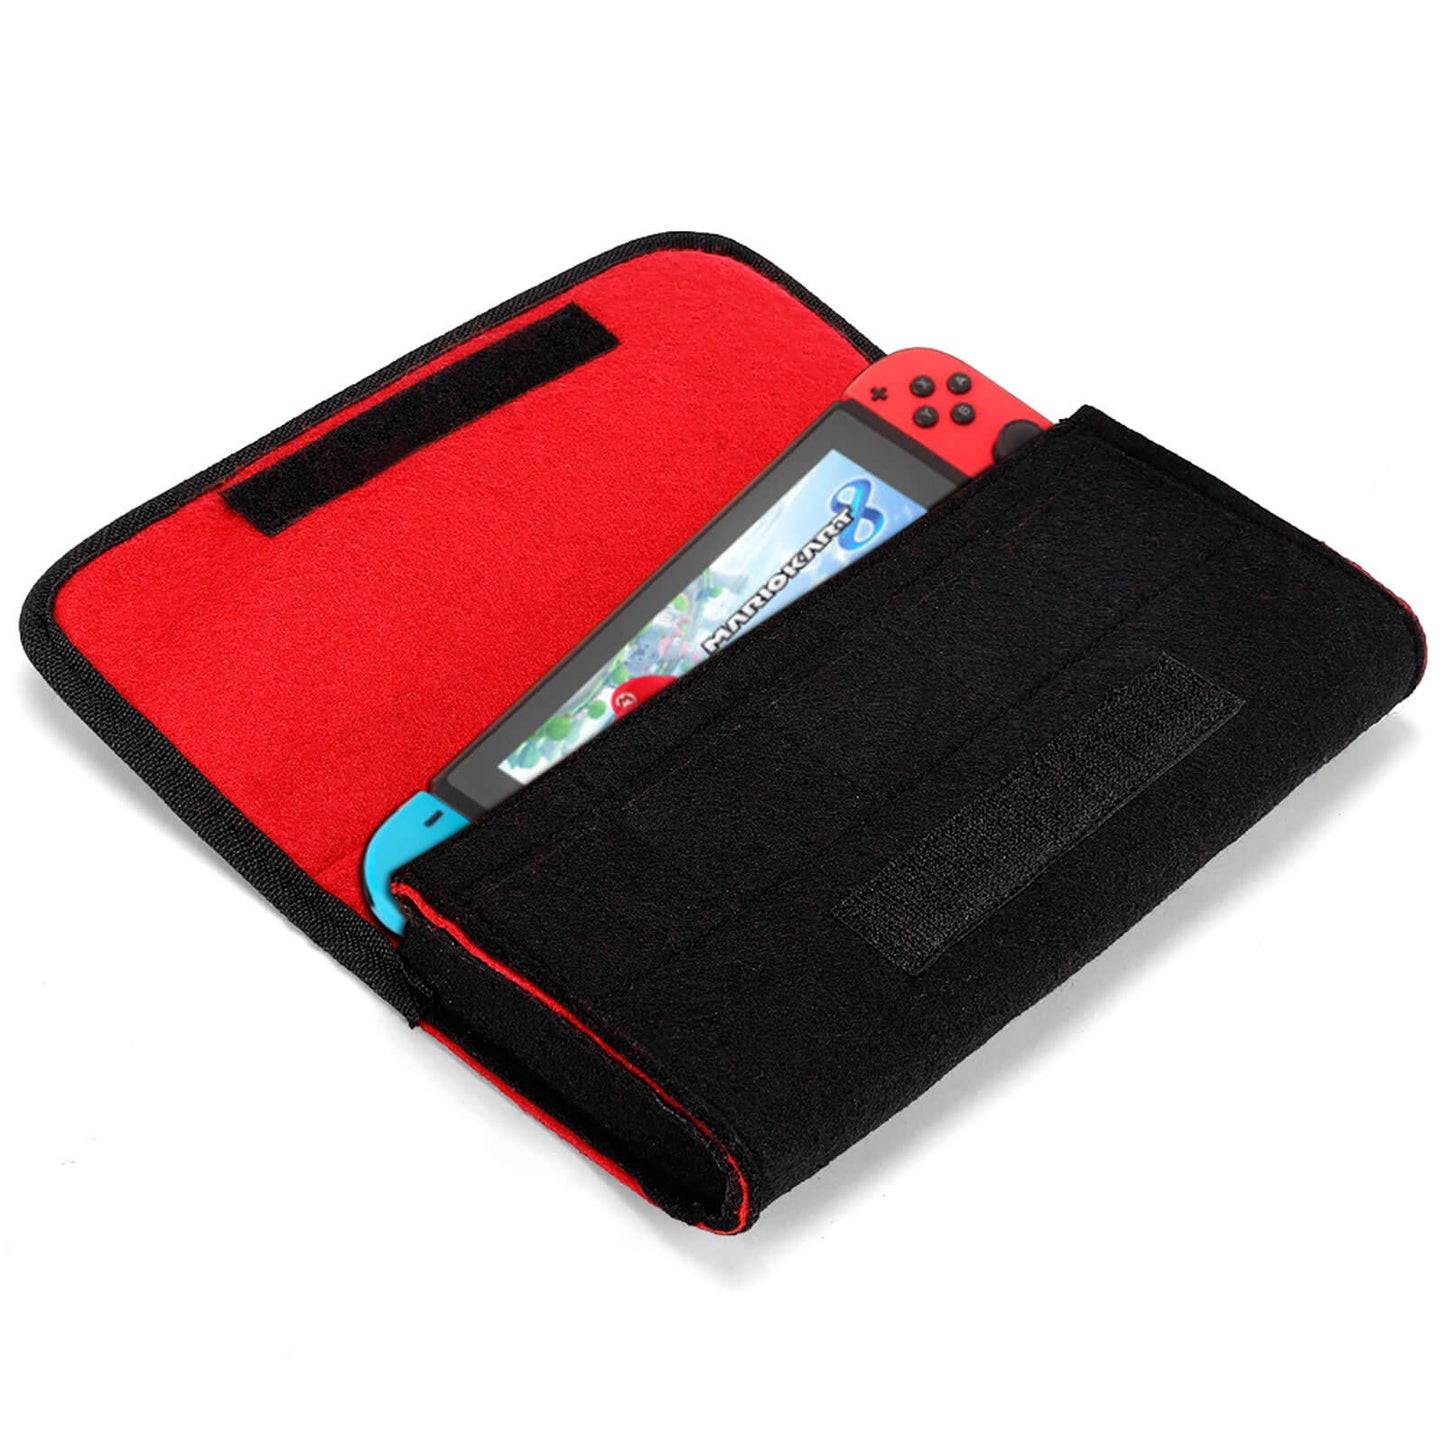 Anime C01 Game Console Storage Bag Protective Cover with 5 Game Card Slots